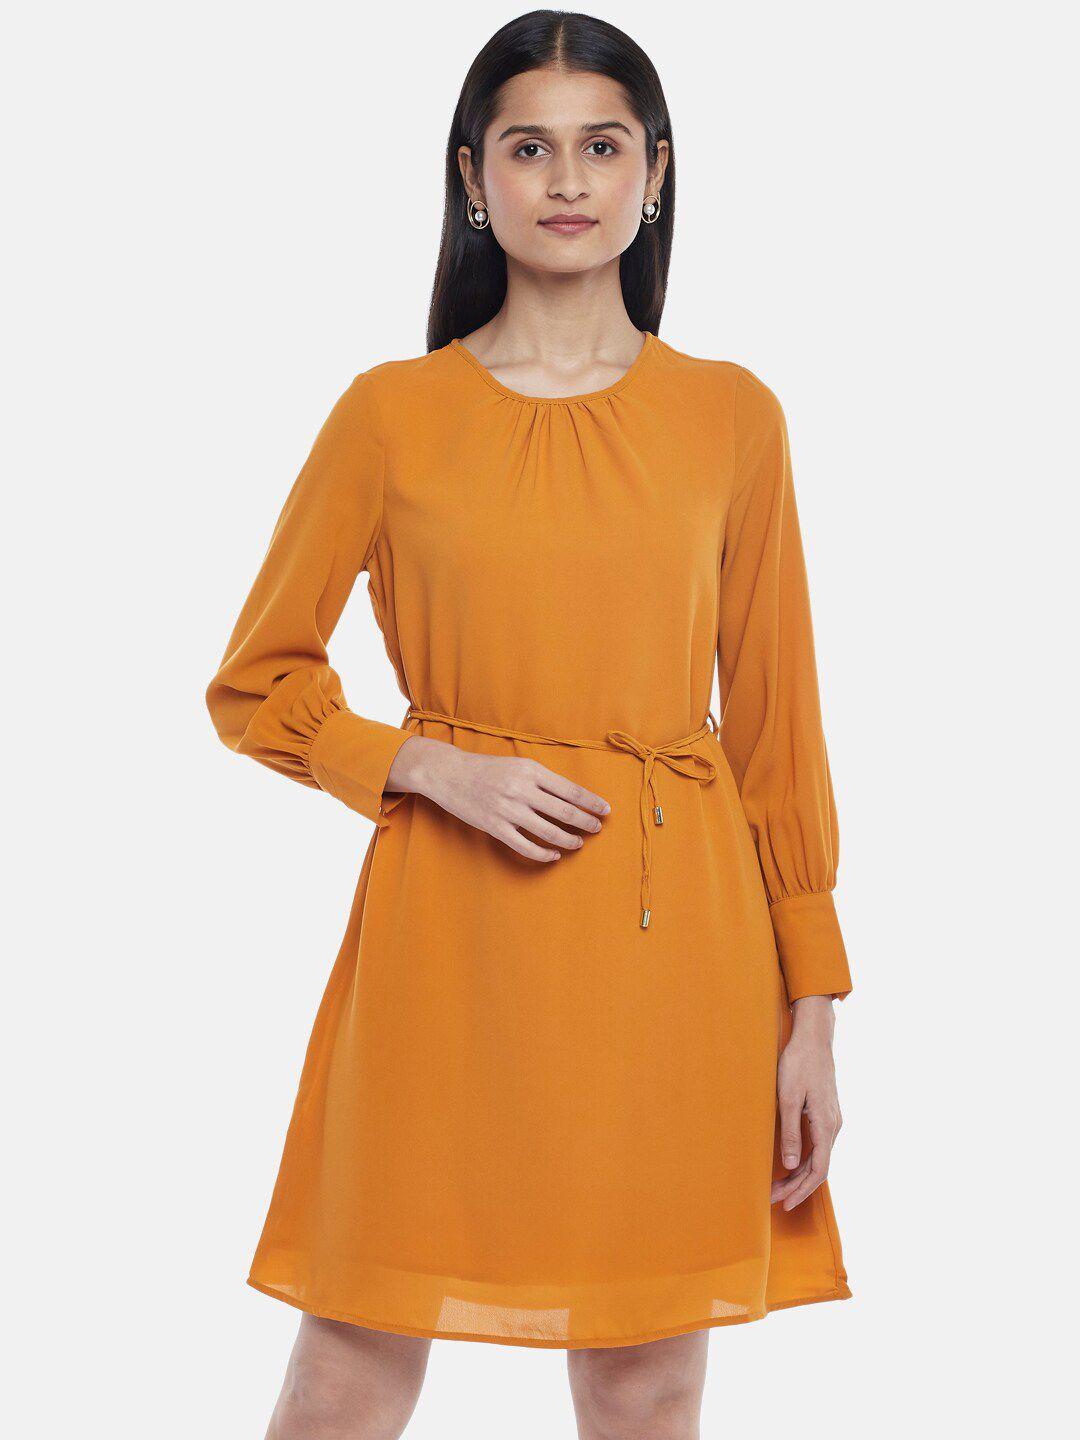 annabelle by pantaloons mustard yellow a-line dress